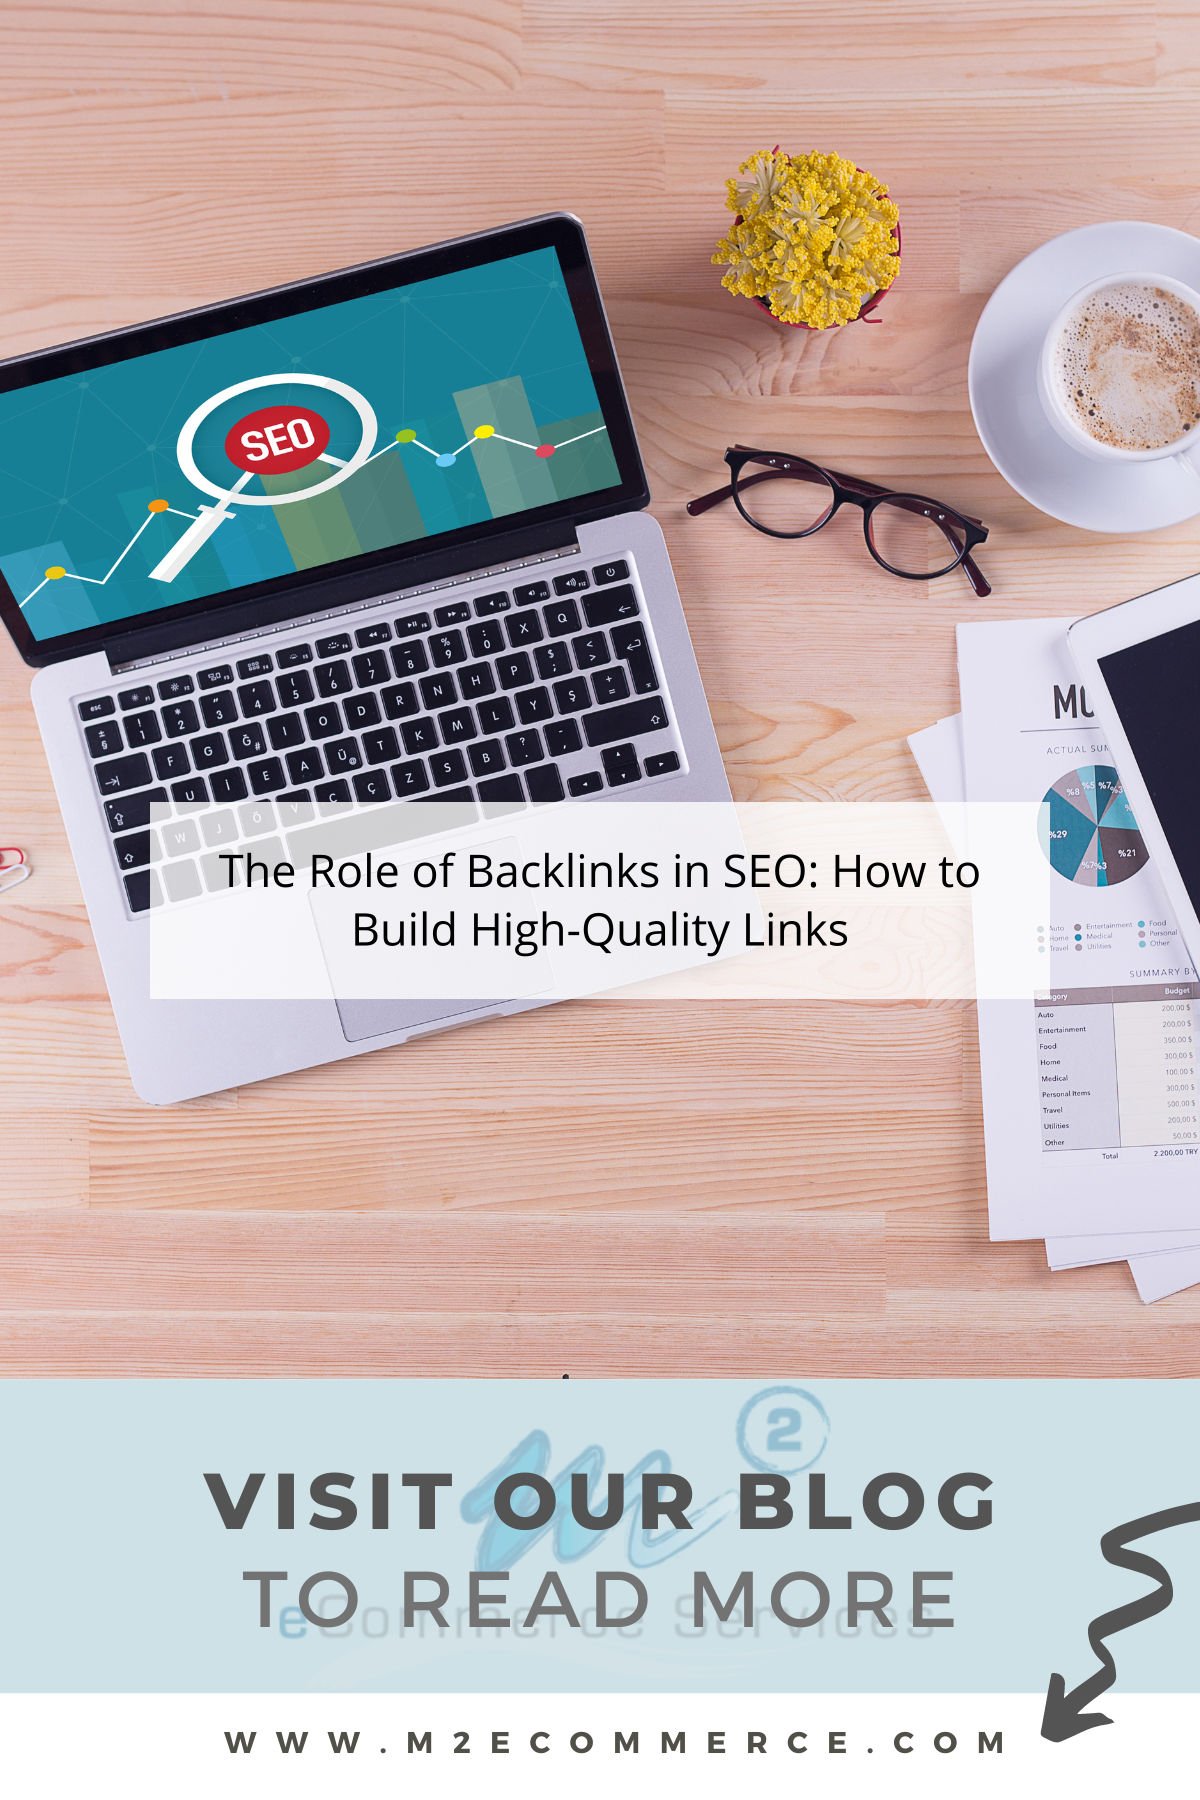 The Role of Backlinks in SEO: How to Build High-Quality Links